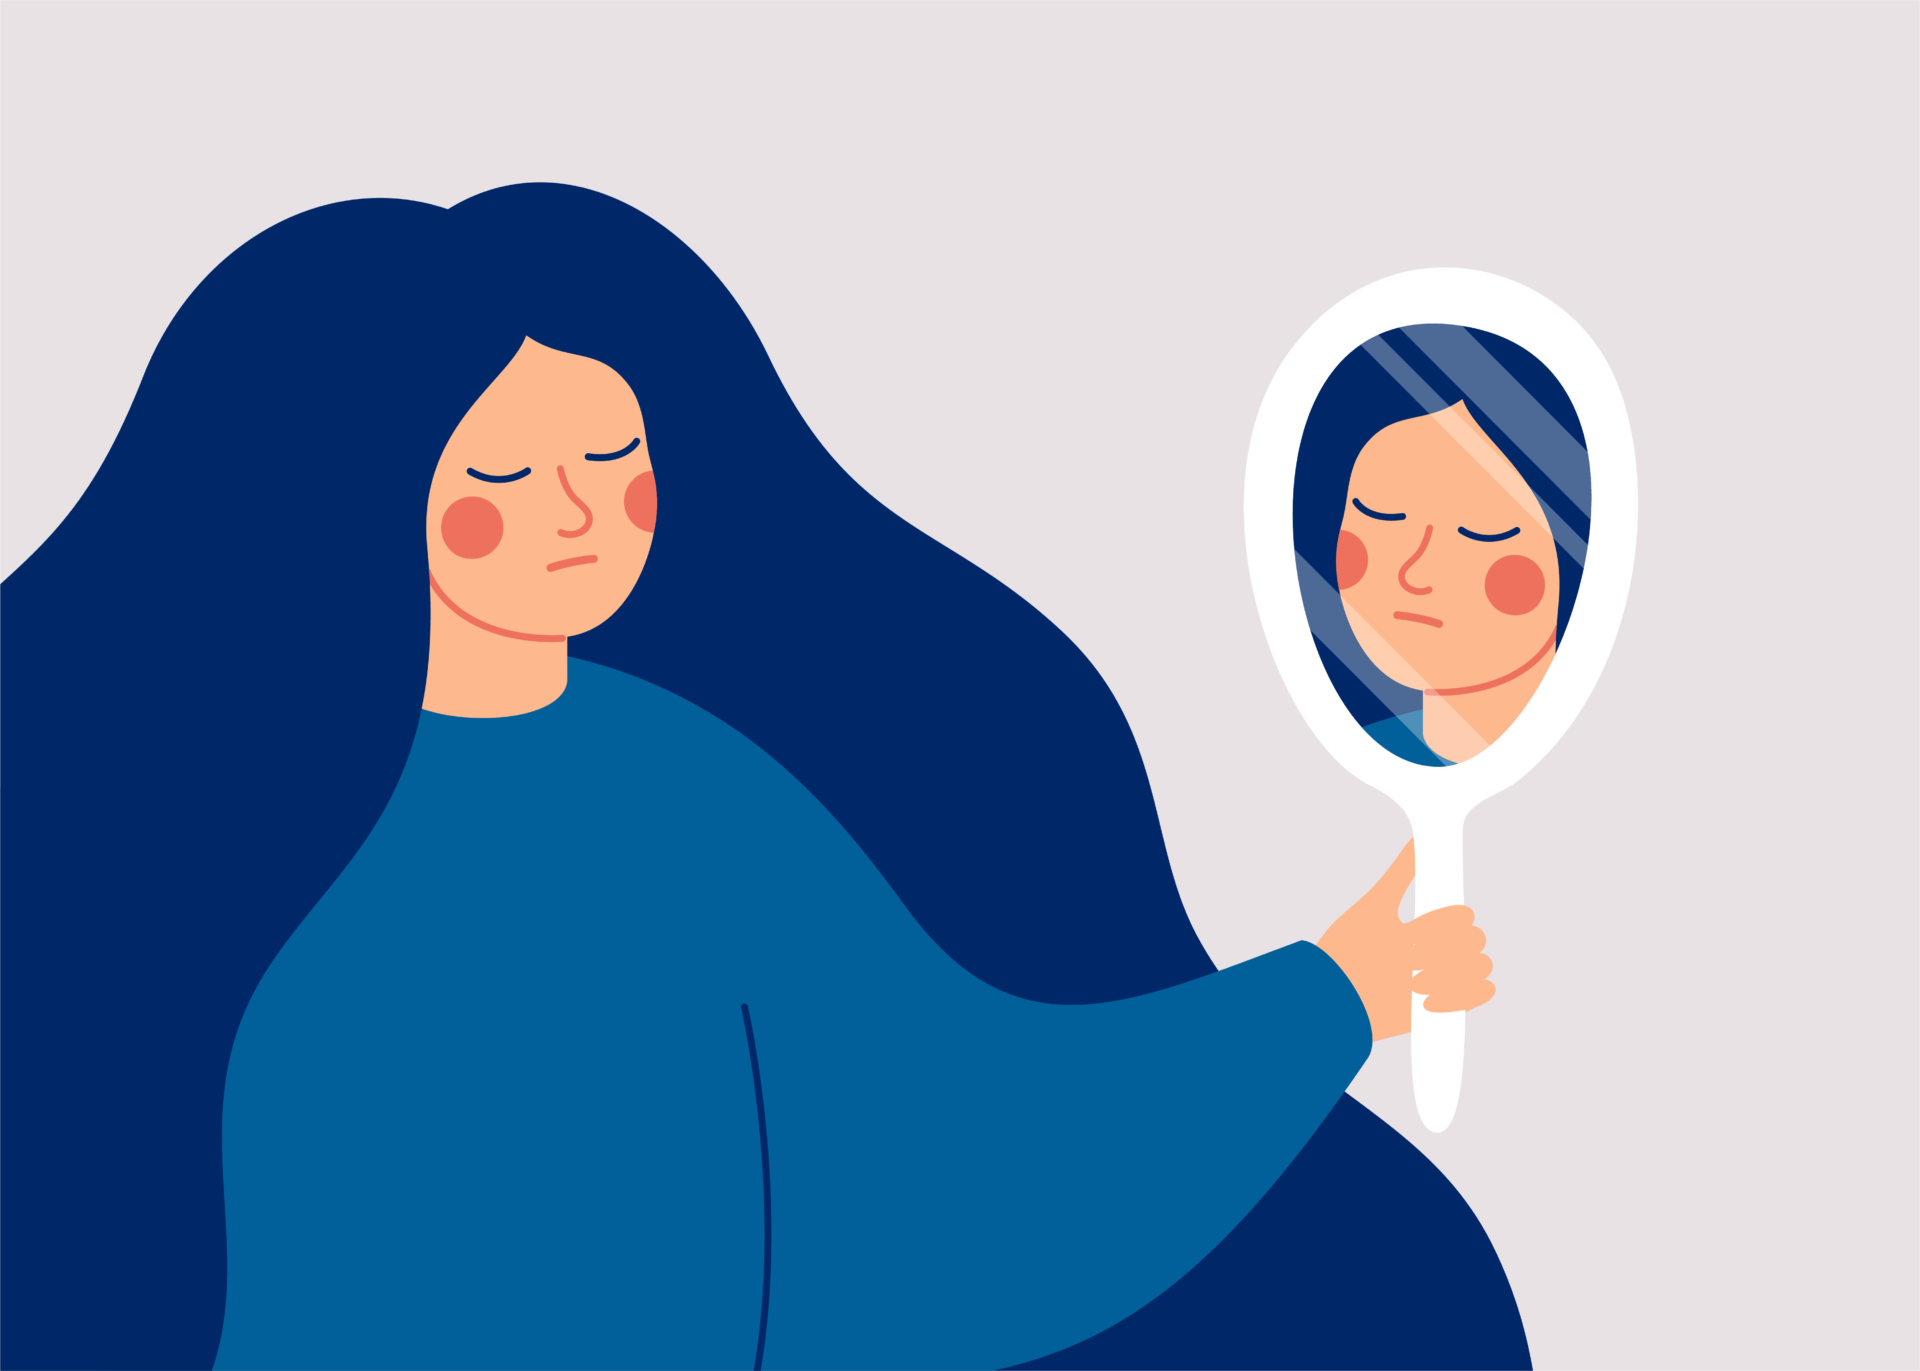 Read more about the article Body Dysmorphia Weight Loss: How to Know if you Have Body Dysmorphia